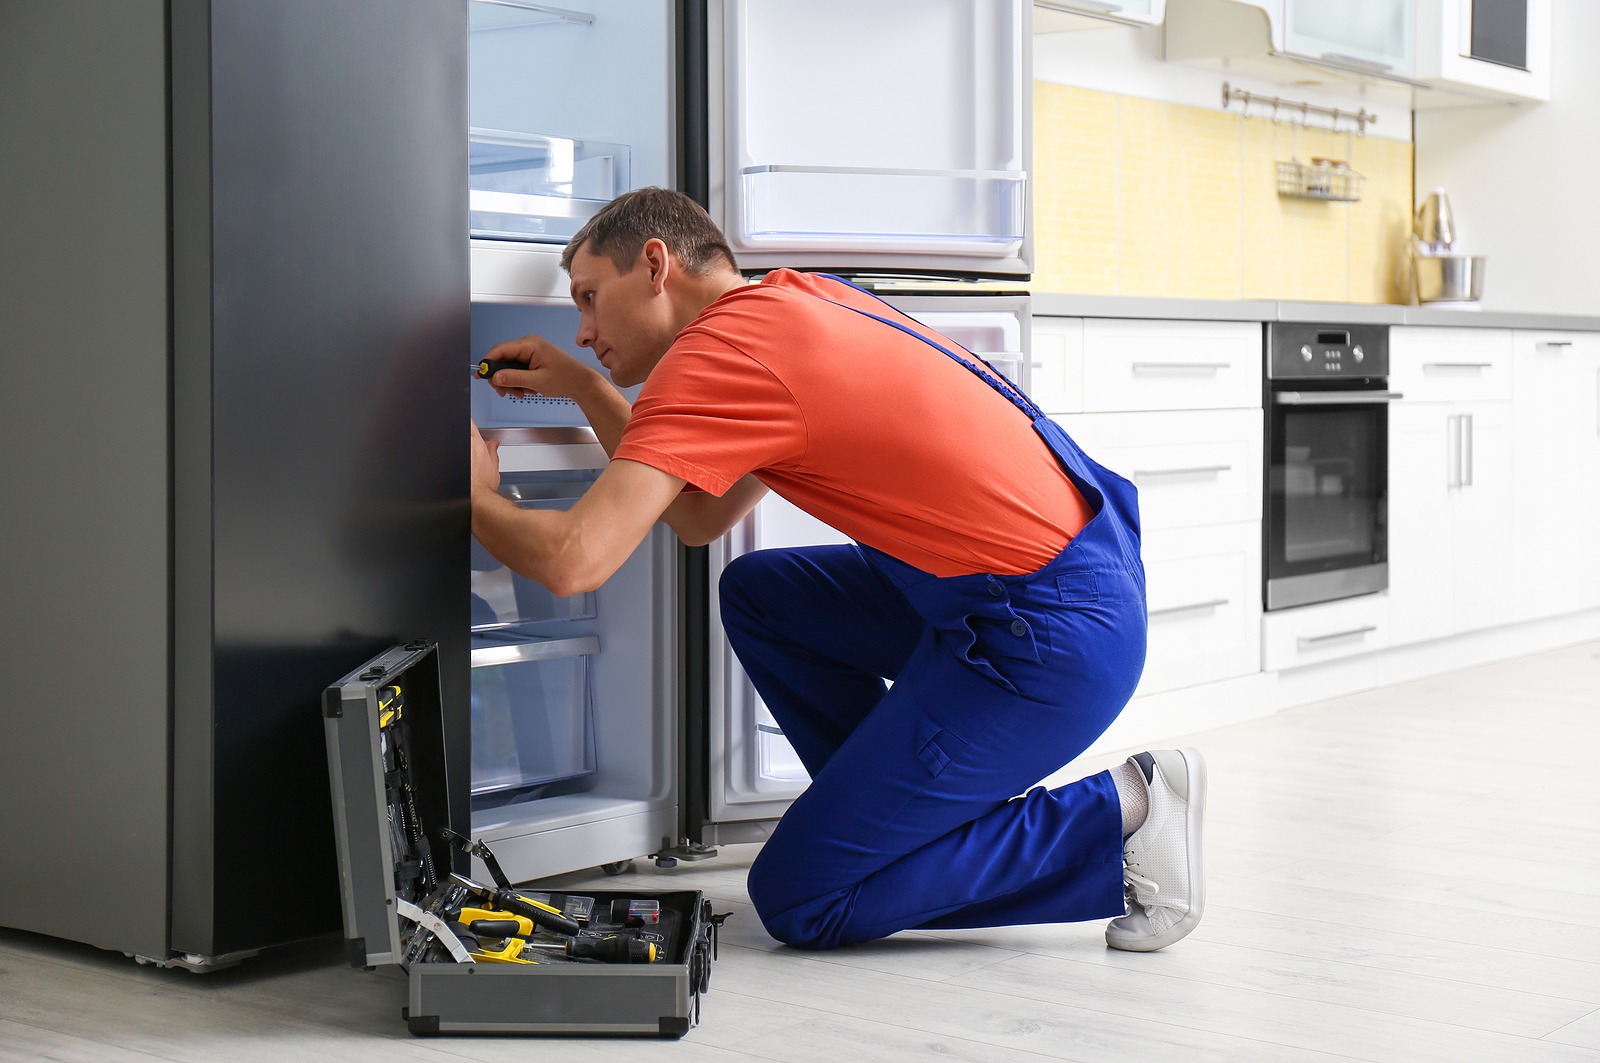 Maytag Appliance Repair Dependable Refrigeration & Appliance Repair Service